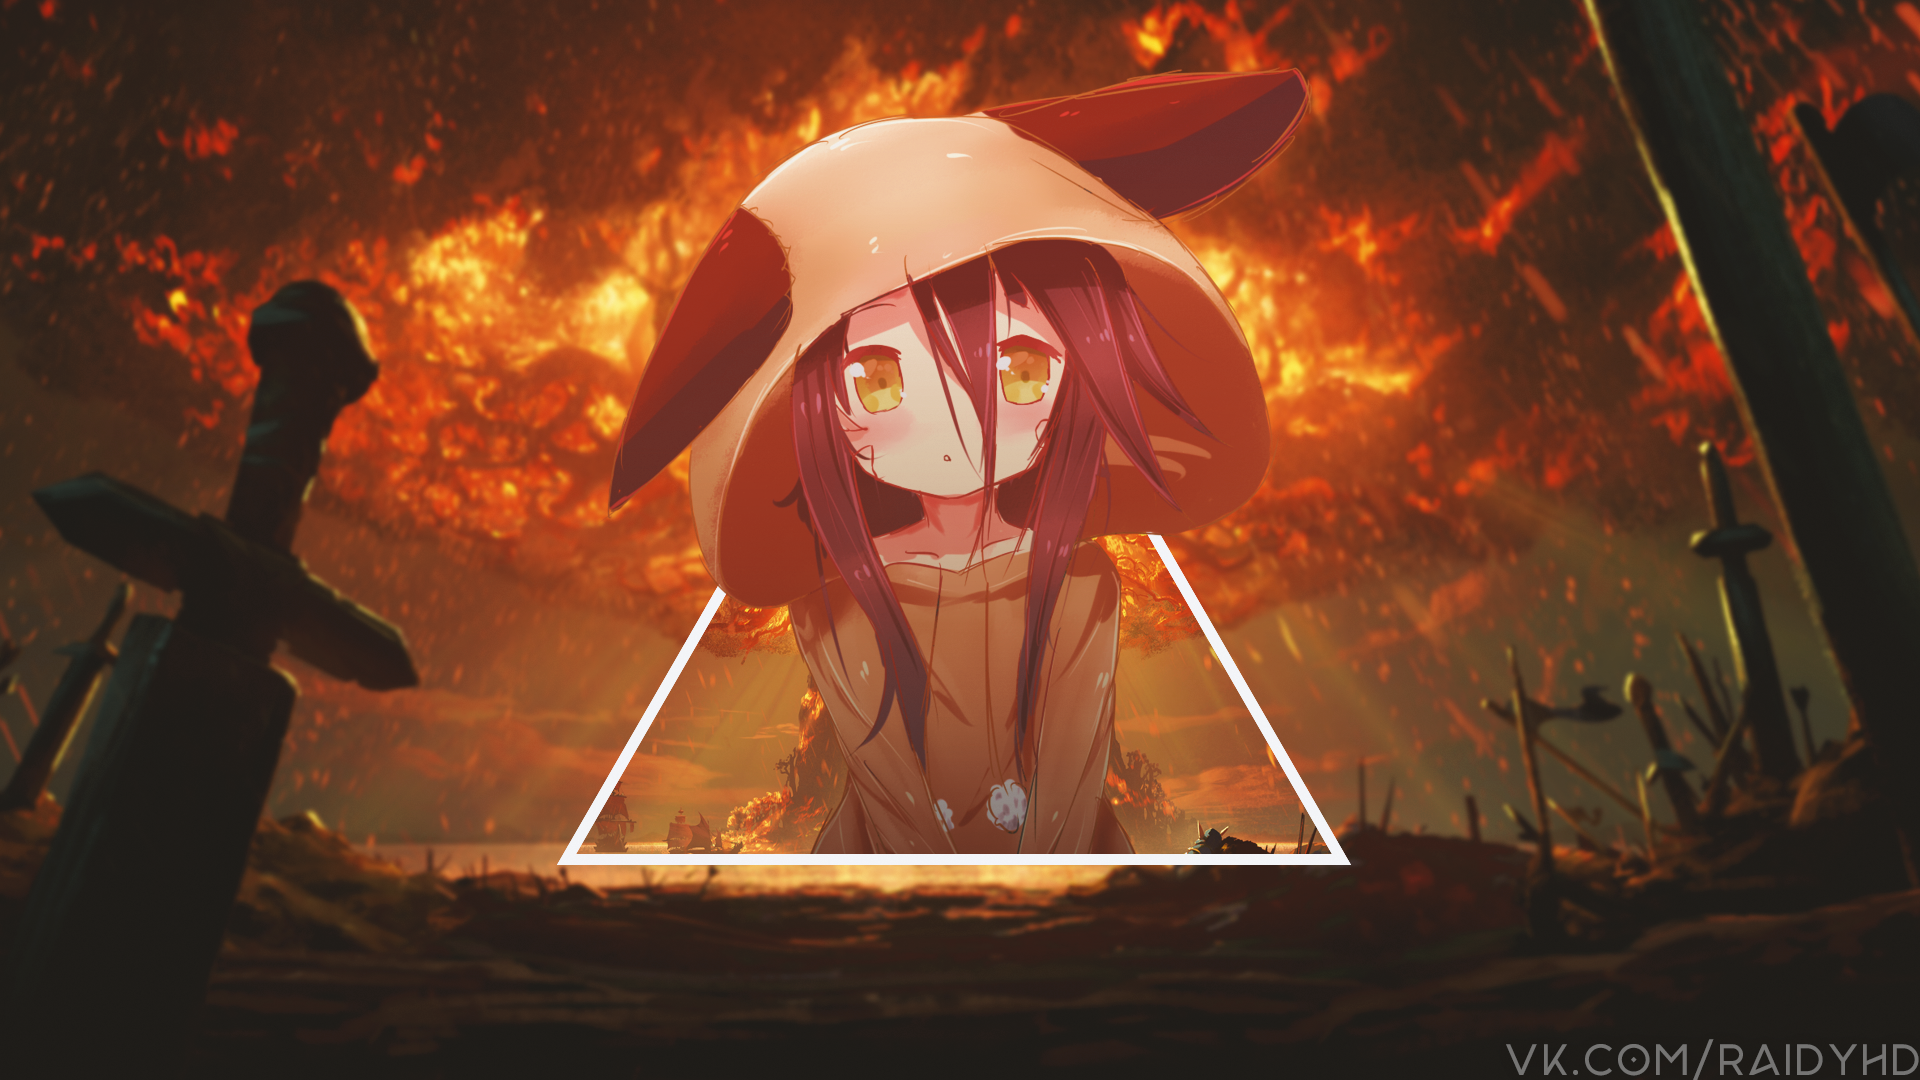 Anime 1920x1080 anime anime girls picture-in-picture No Game No Life Shuvi